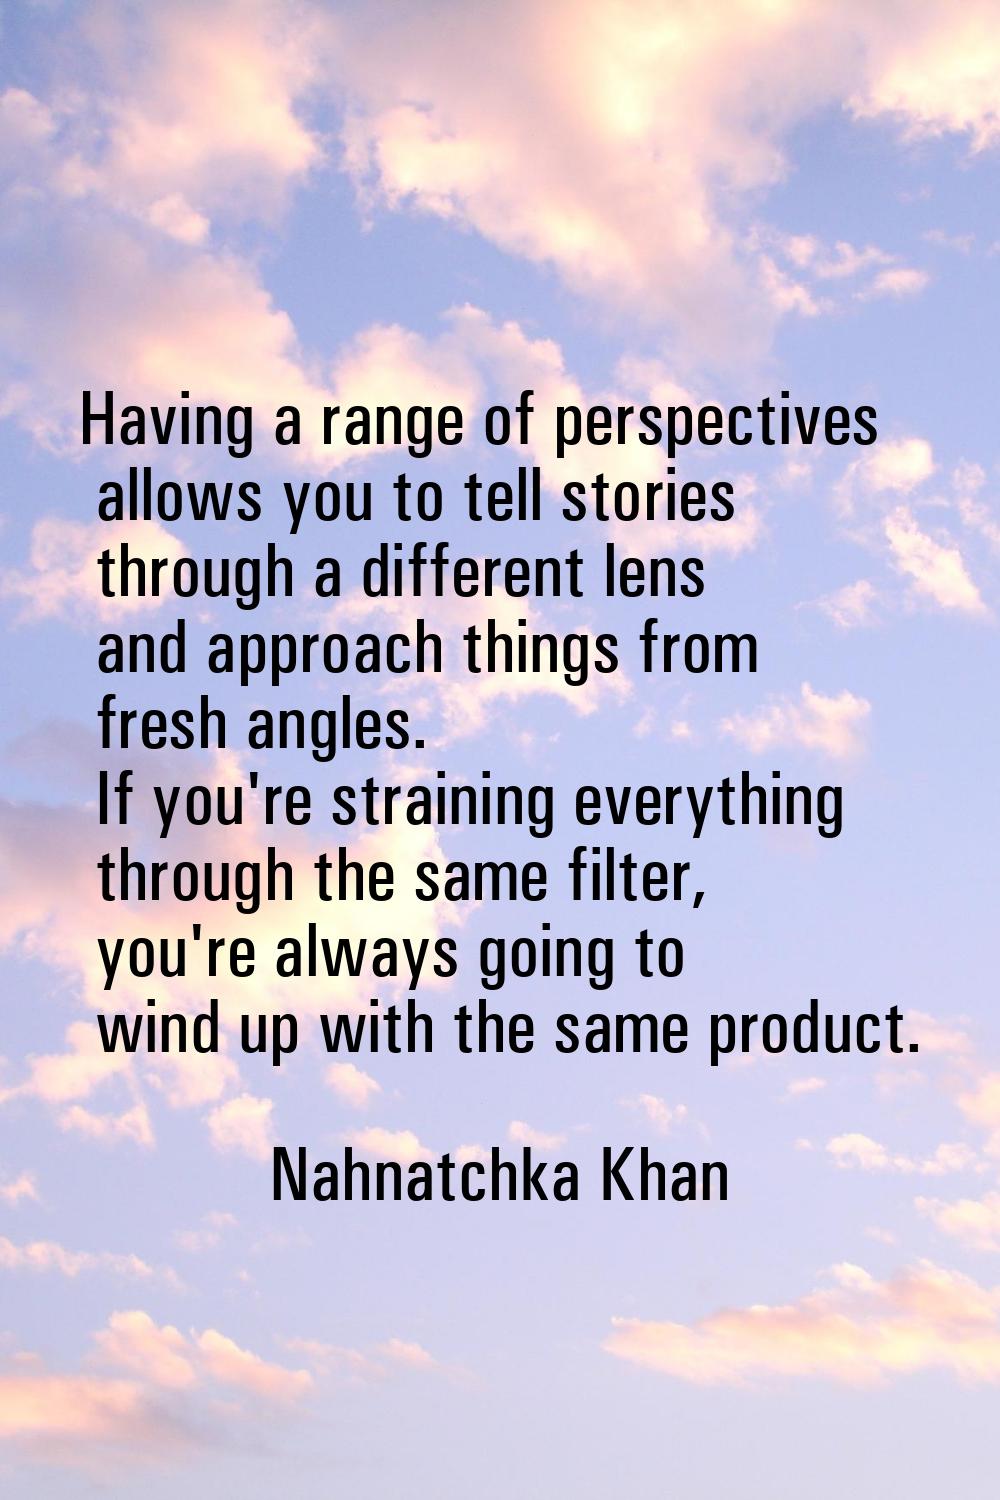 Having a range of perspectives allows you to tell stories through a different lens and approach thi